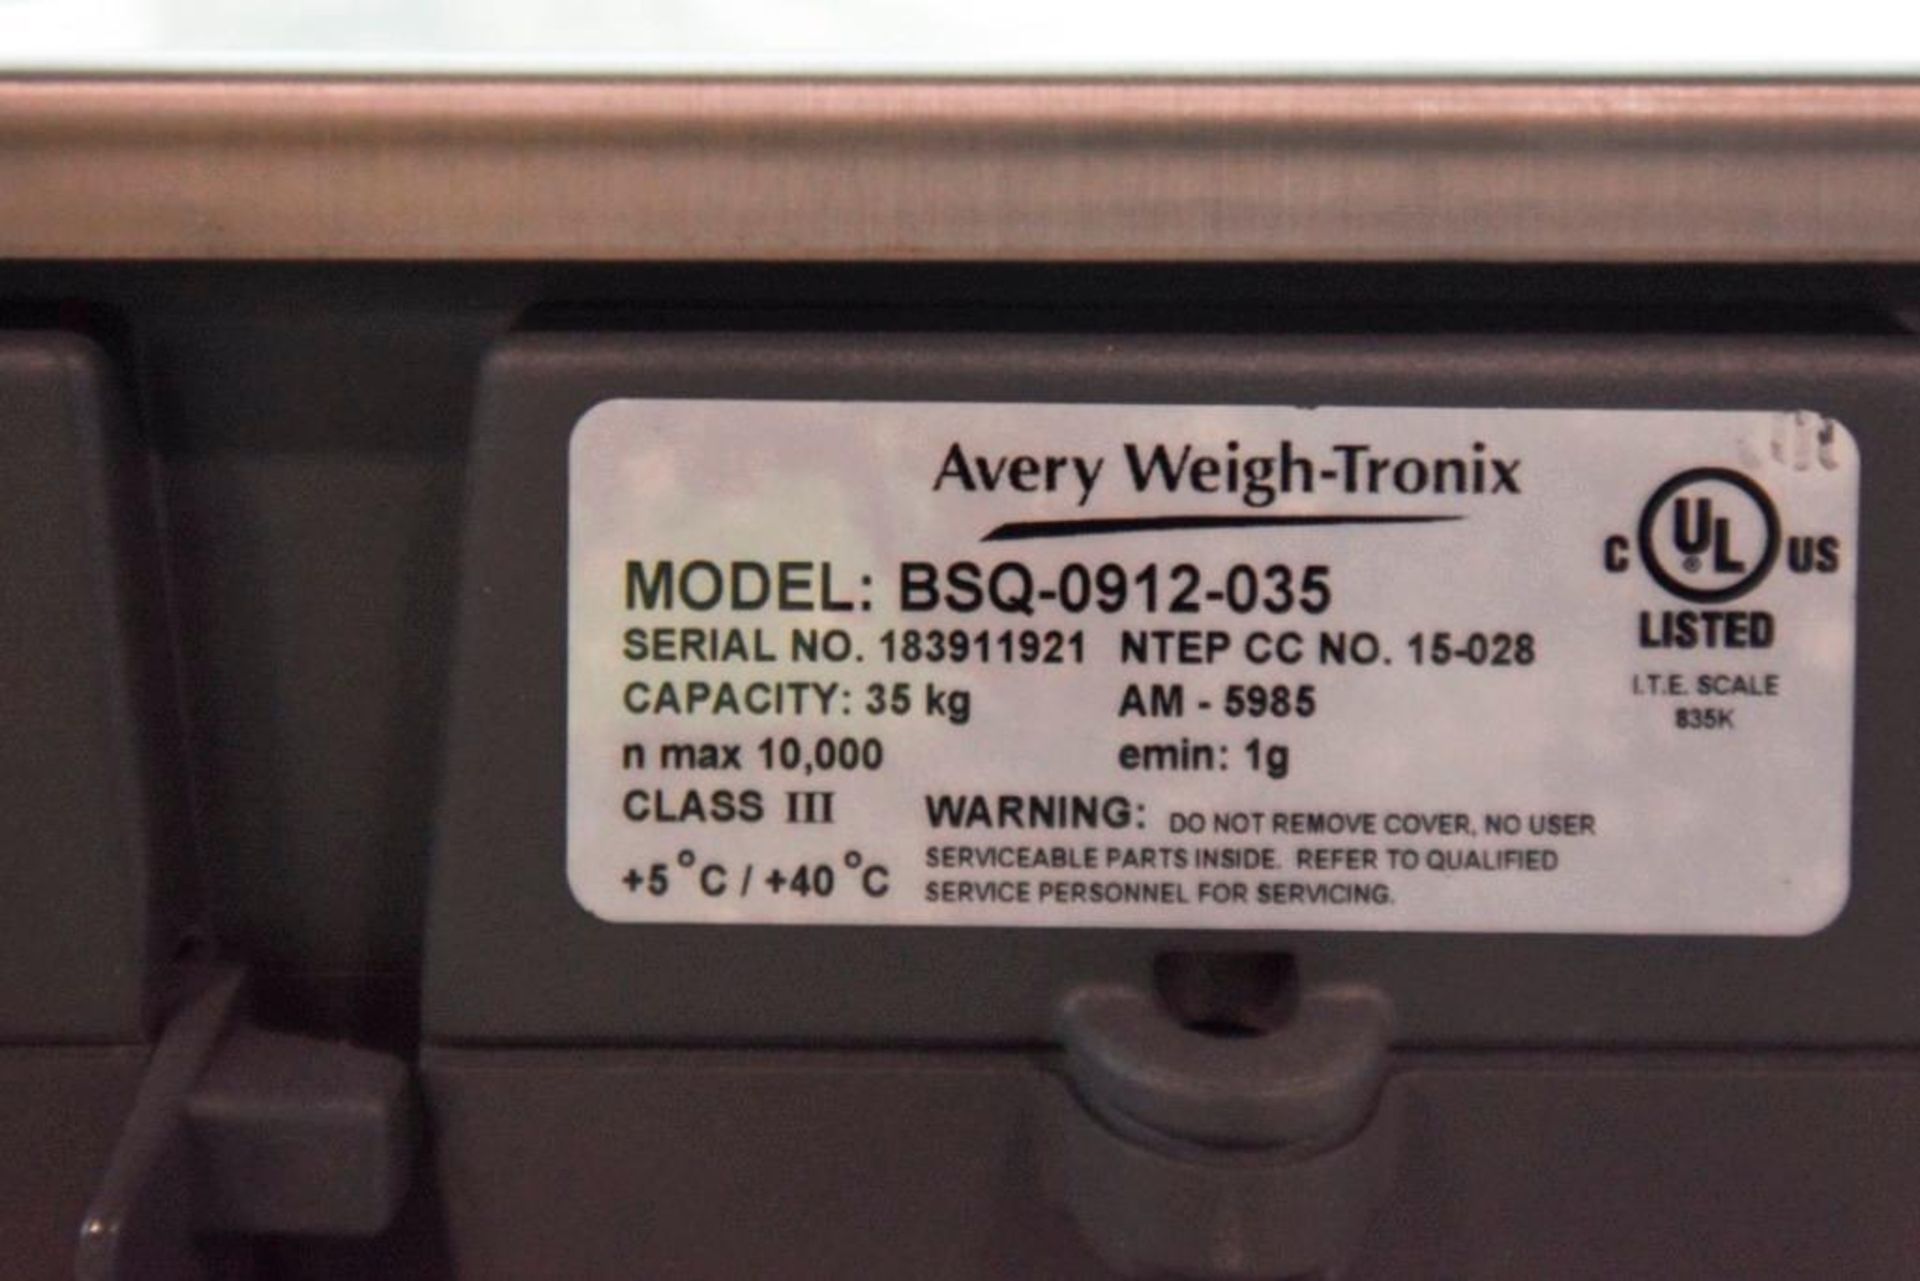 Avery Weigh-Tronix 2K830 Scale - Image 10 of 10